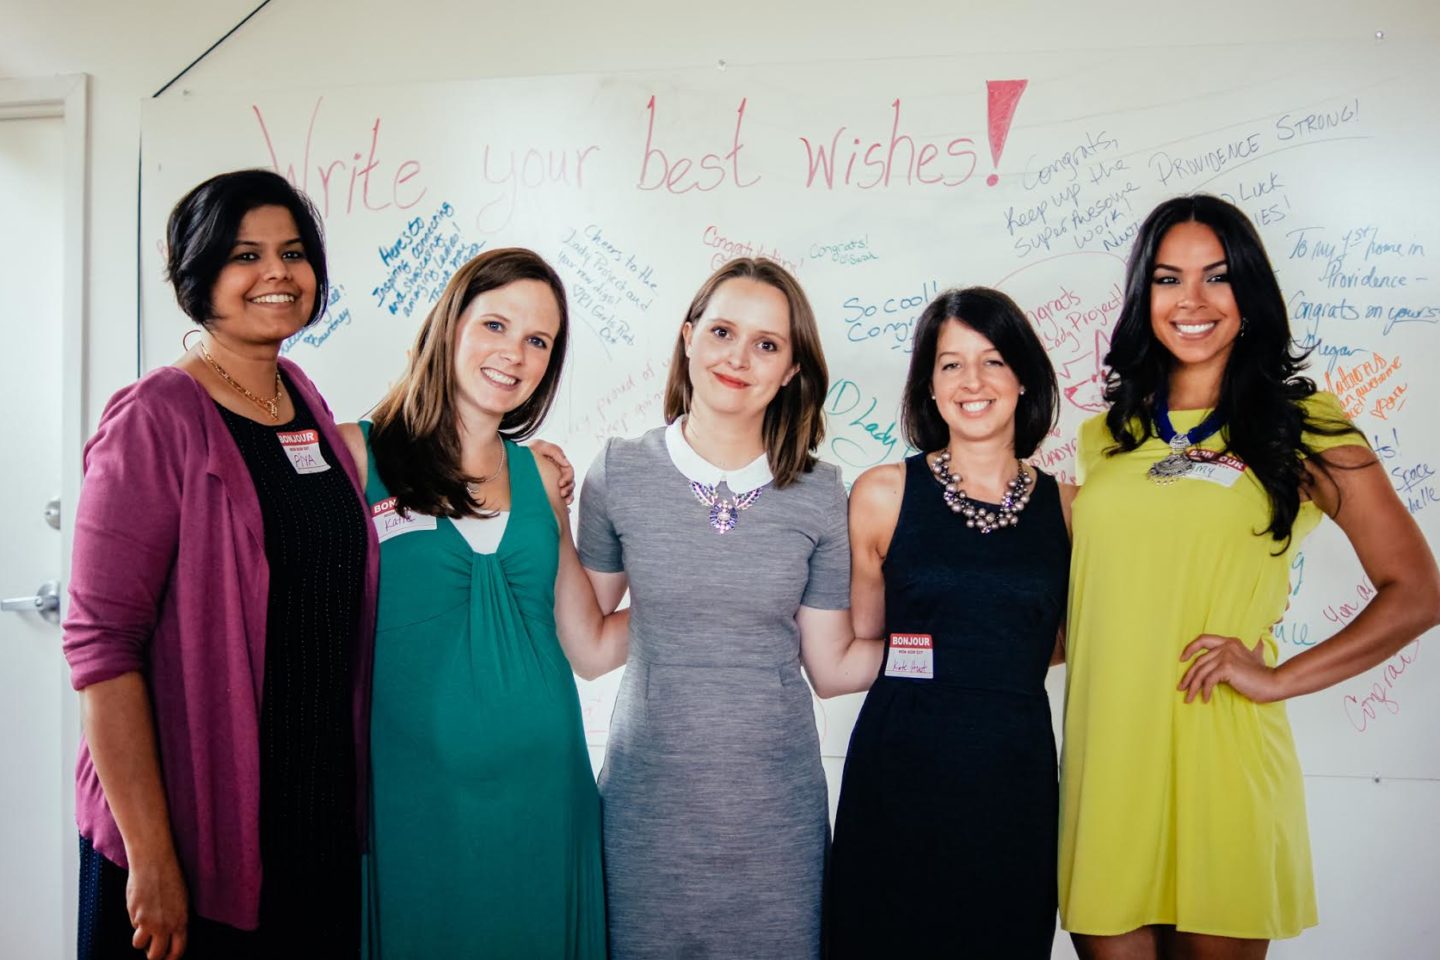 Sierra Barter Co-Founded The Lady Project So Awesome Women Could Support Each Other